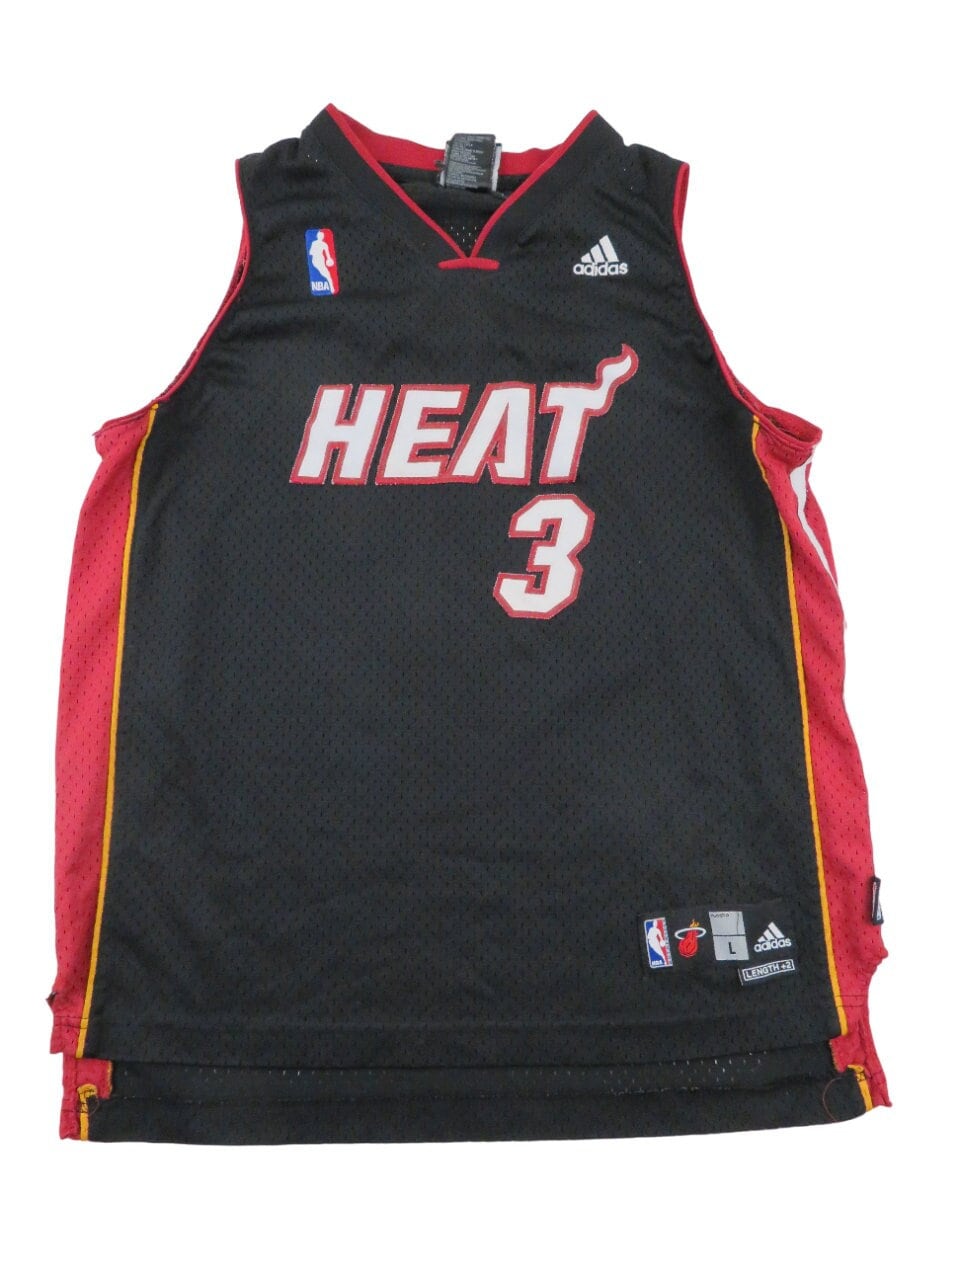 adidas, Shirts & Tops, Dwayne Wade Miami Heat Nba Jersey Youth Small 8  Home White Stitched Numbers